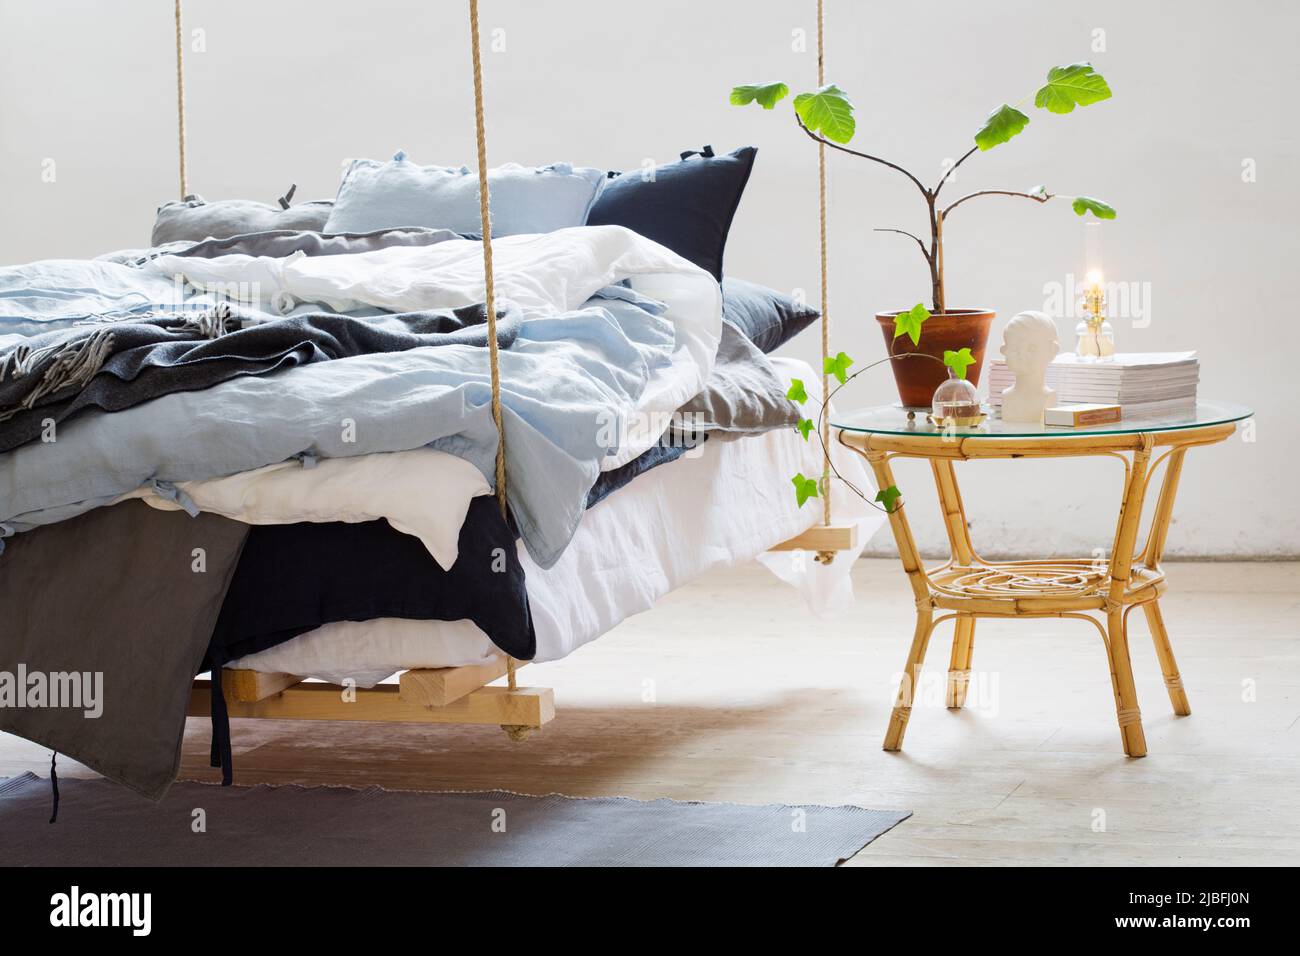 Hanging bed and bedside table Stock Photo